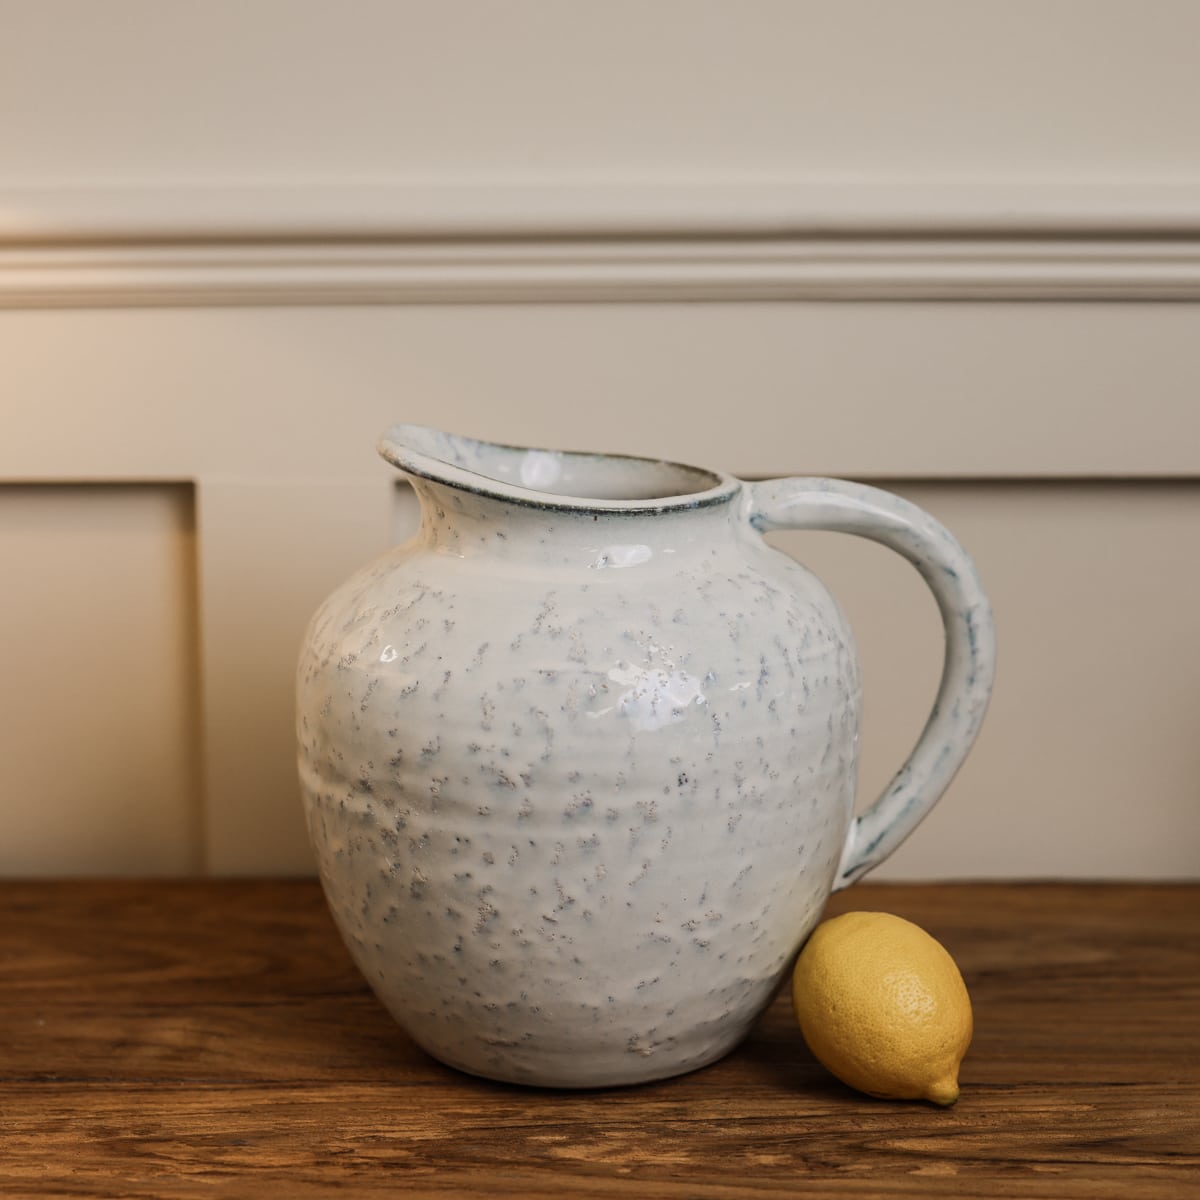 Small speckled glazed ceramic jug on wooden console with lemon.